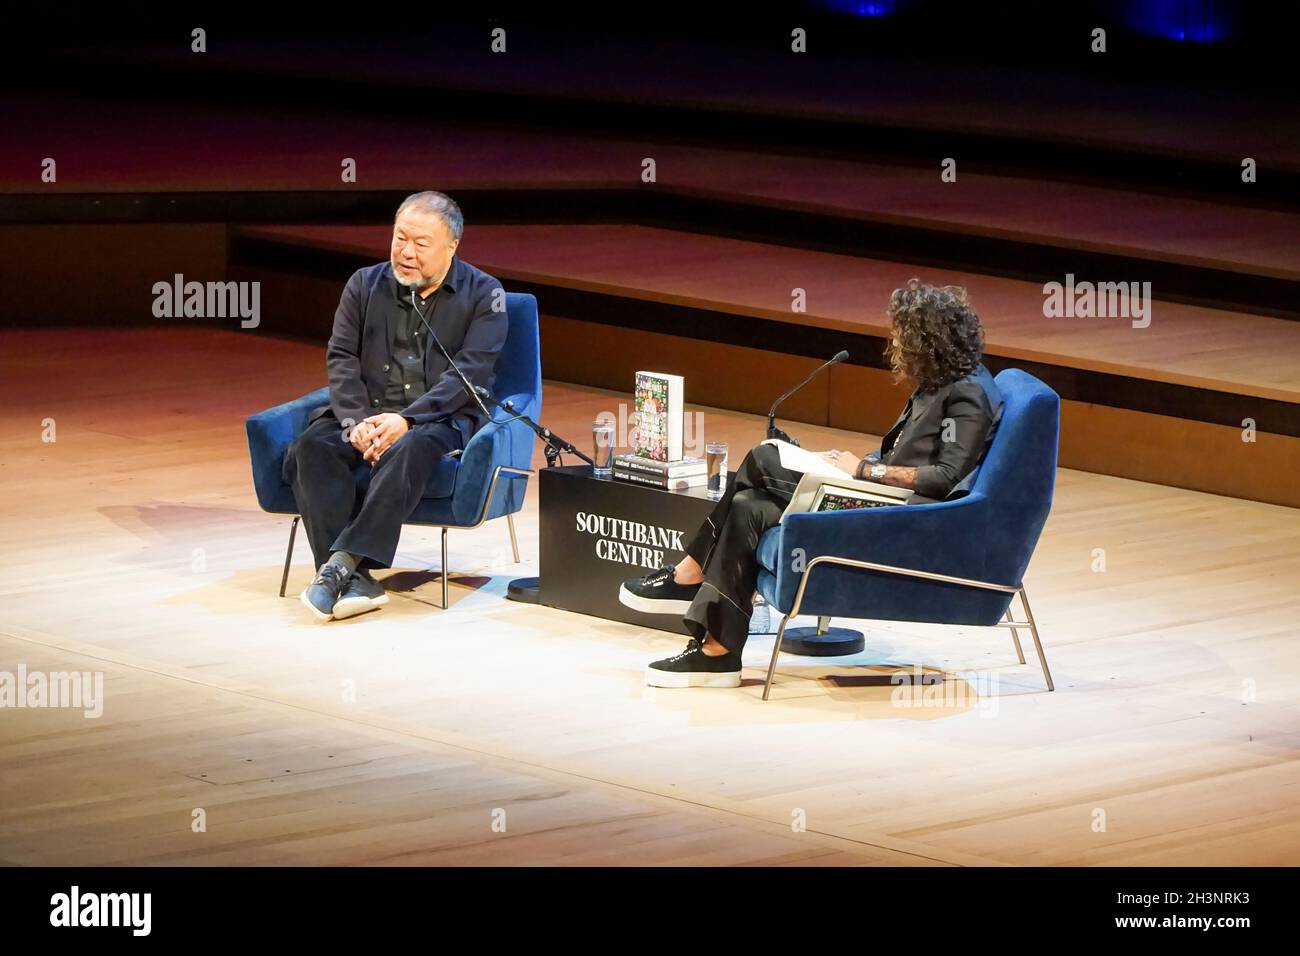 London, UK, 29 October 2021: Artist Ai Weiwei launched his autobiography '1000 Years of Joys and Sorrows' at the Royal Festival Hall as part of the London Literature Festival. The artist was interviewed by BBC journalist Razia Iqbal about his family background in China, his detention by the Chinese authorities and his art. To mark the occasion, a new artwork by Ai was projected on the outside of the building, comprising quotations from an international selection of writers and activists. Anna Watson/Alamy Live News Stock Photo